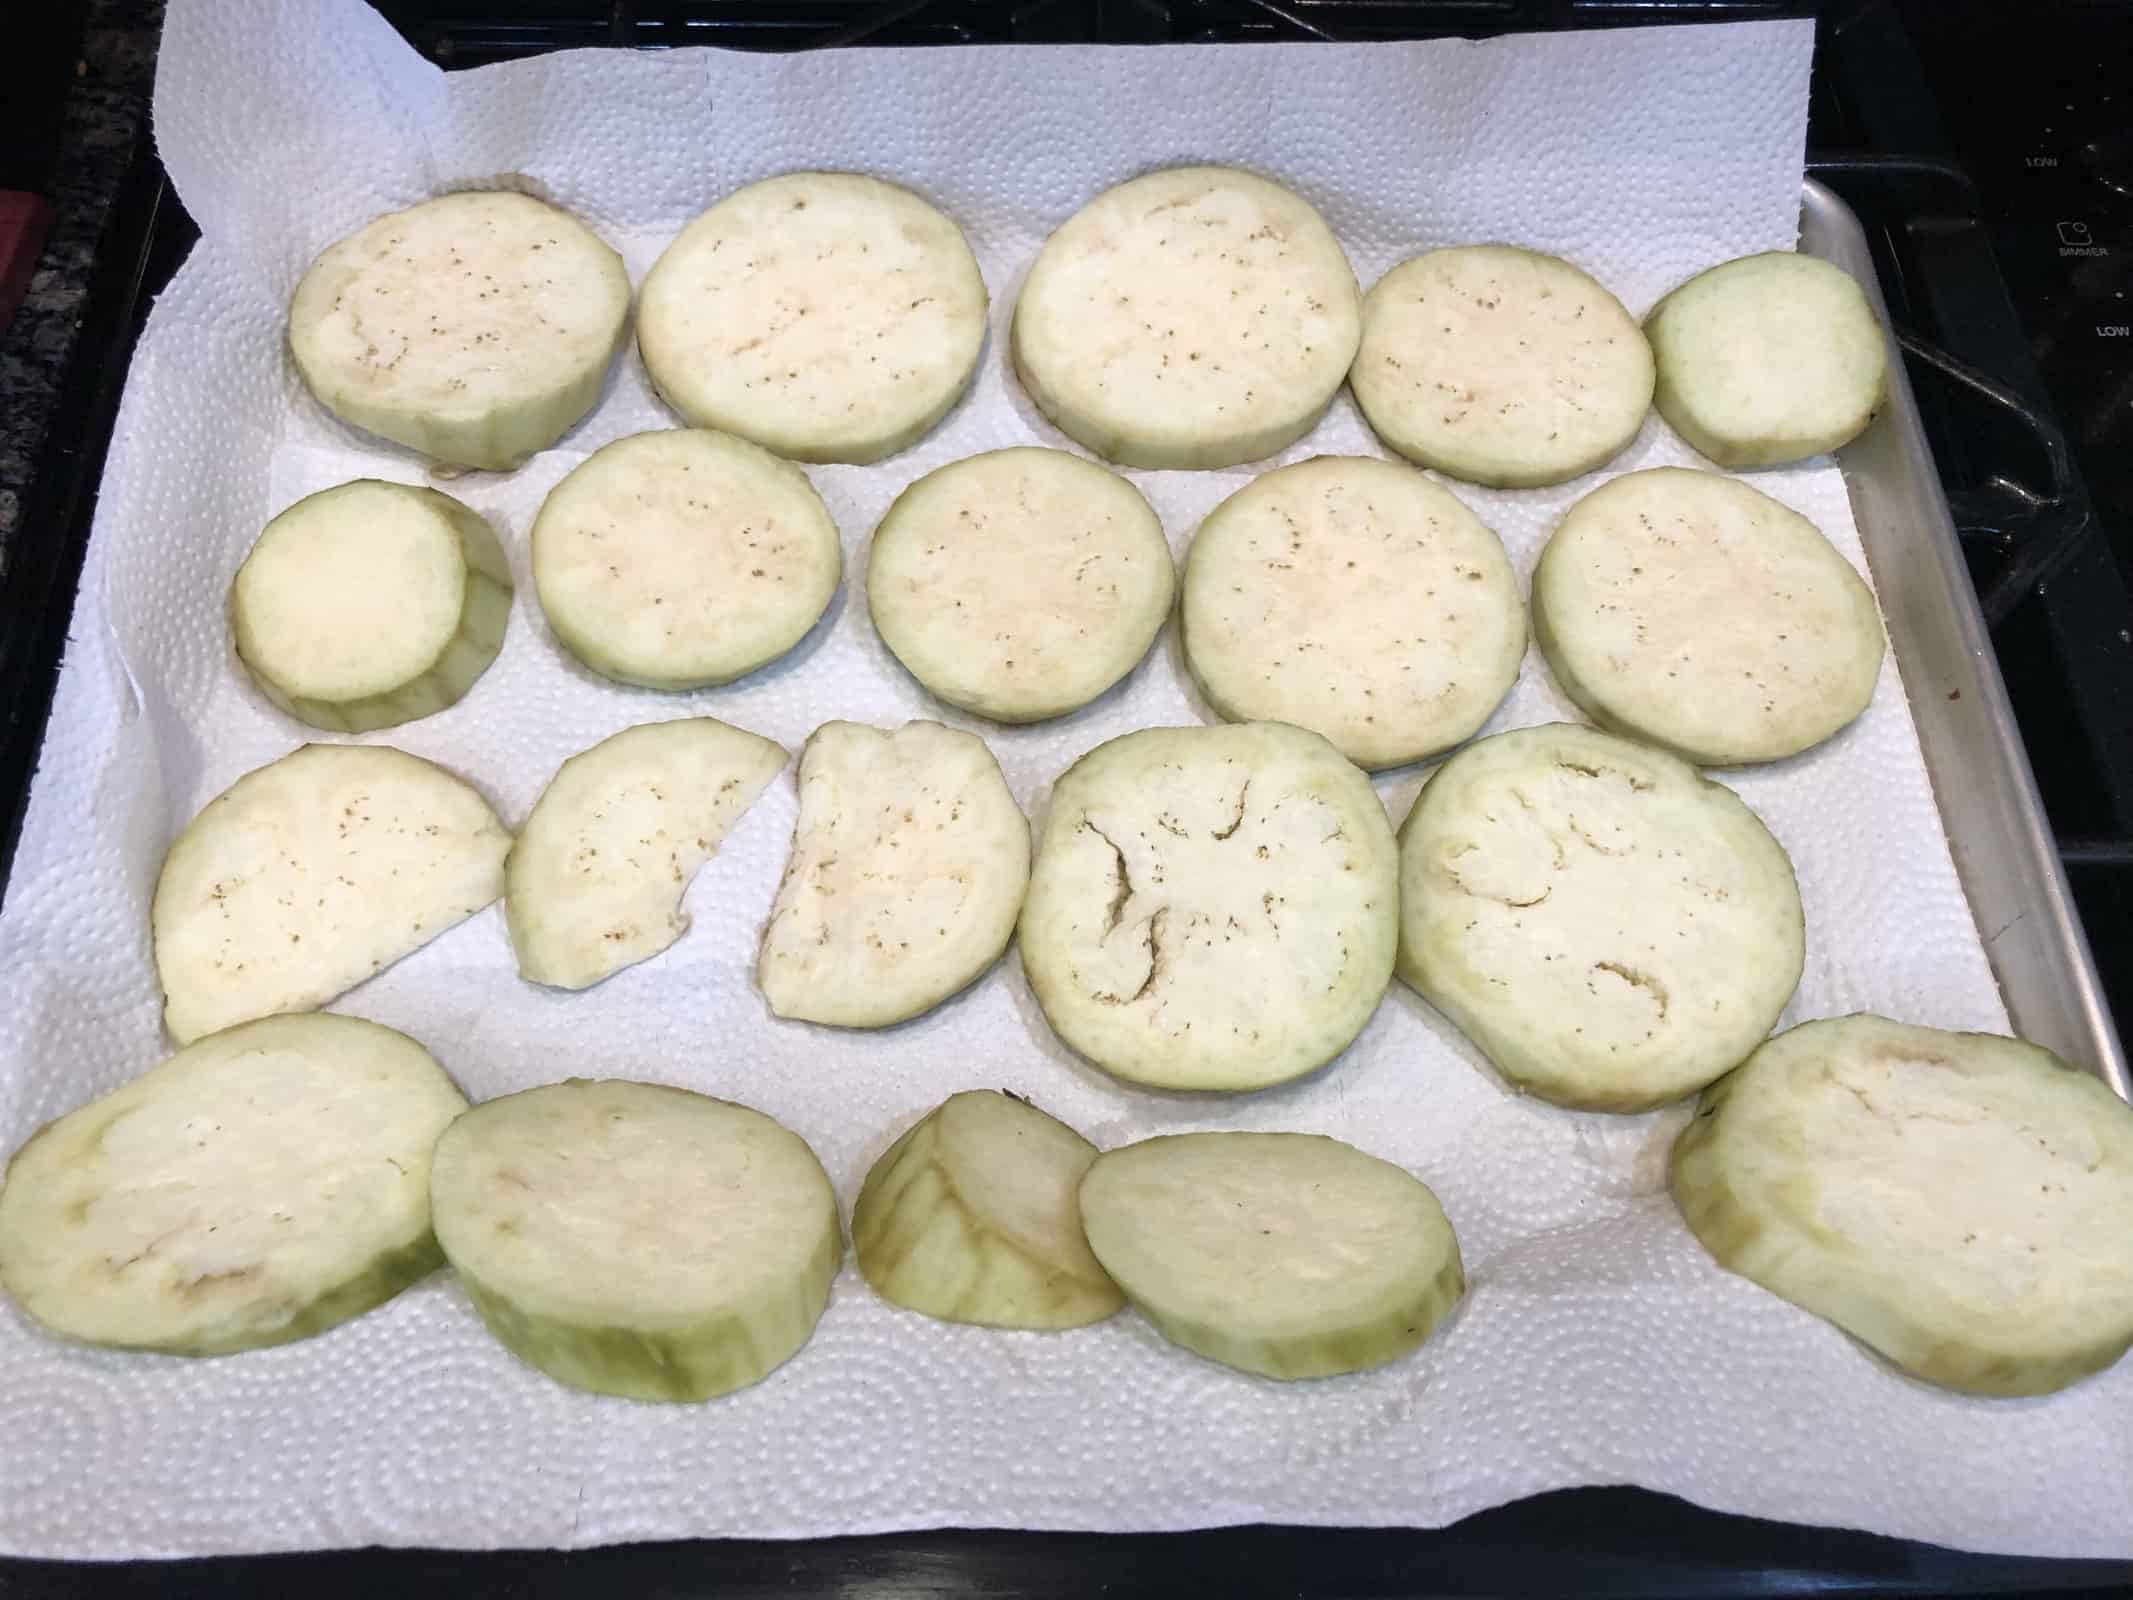 Eggplant slices on Paper towels